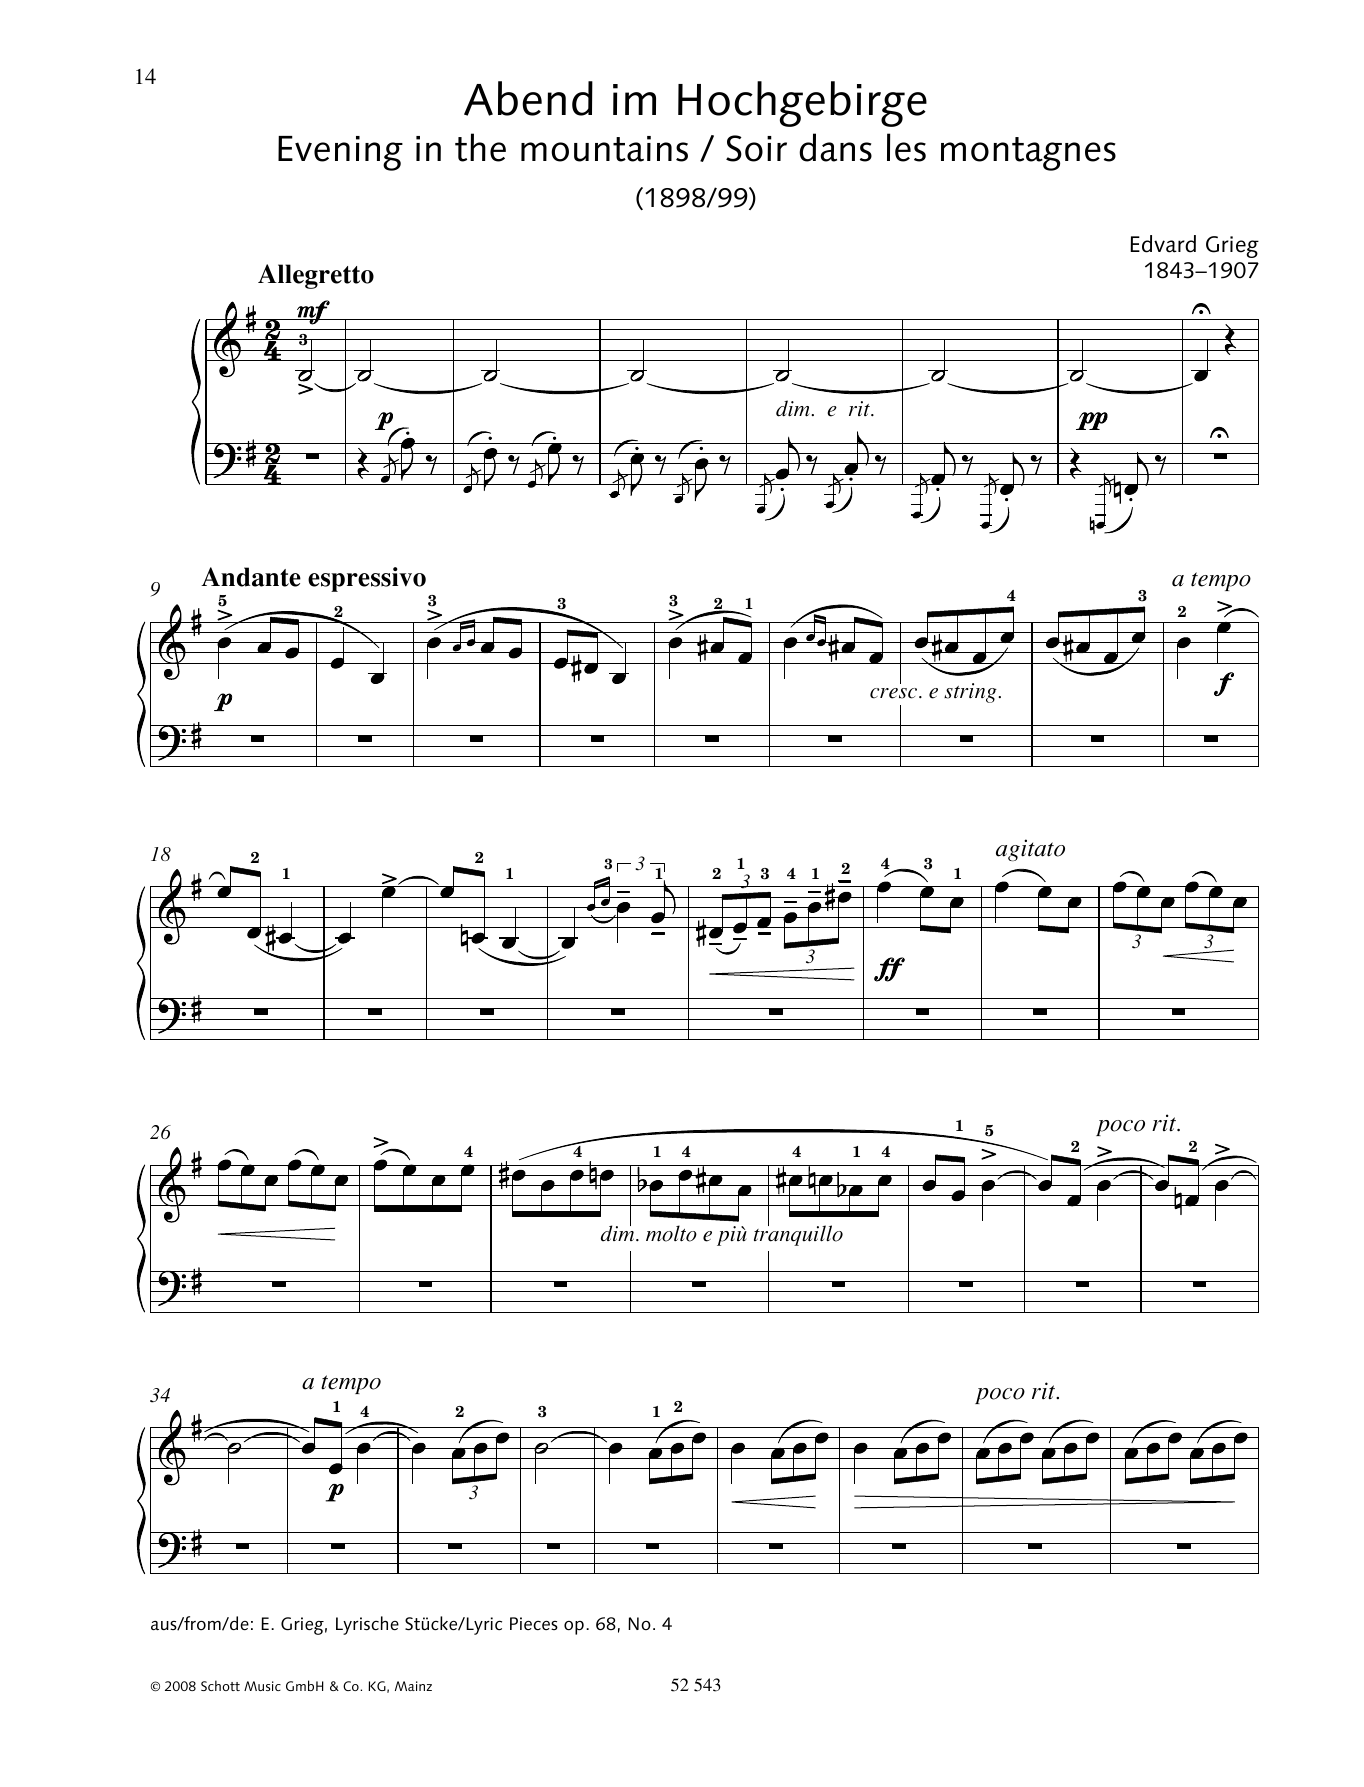 Download Edvard Grieg Evening in the mountains Sheet Music